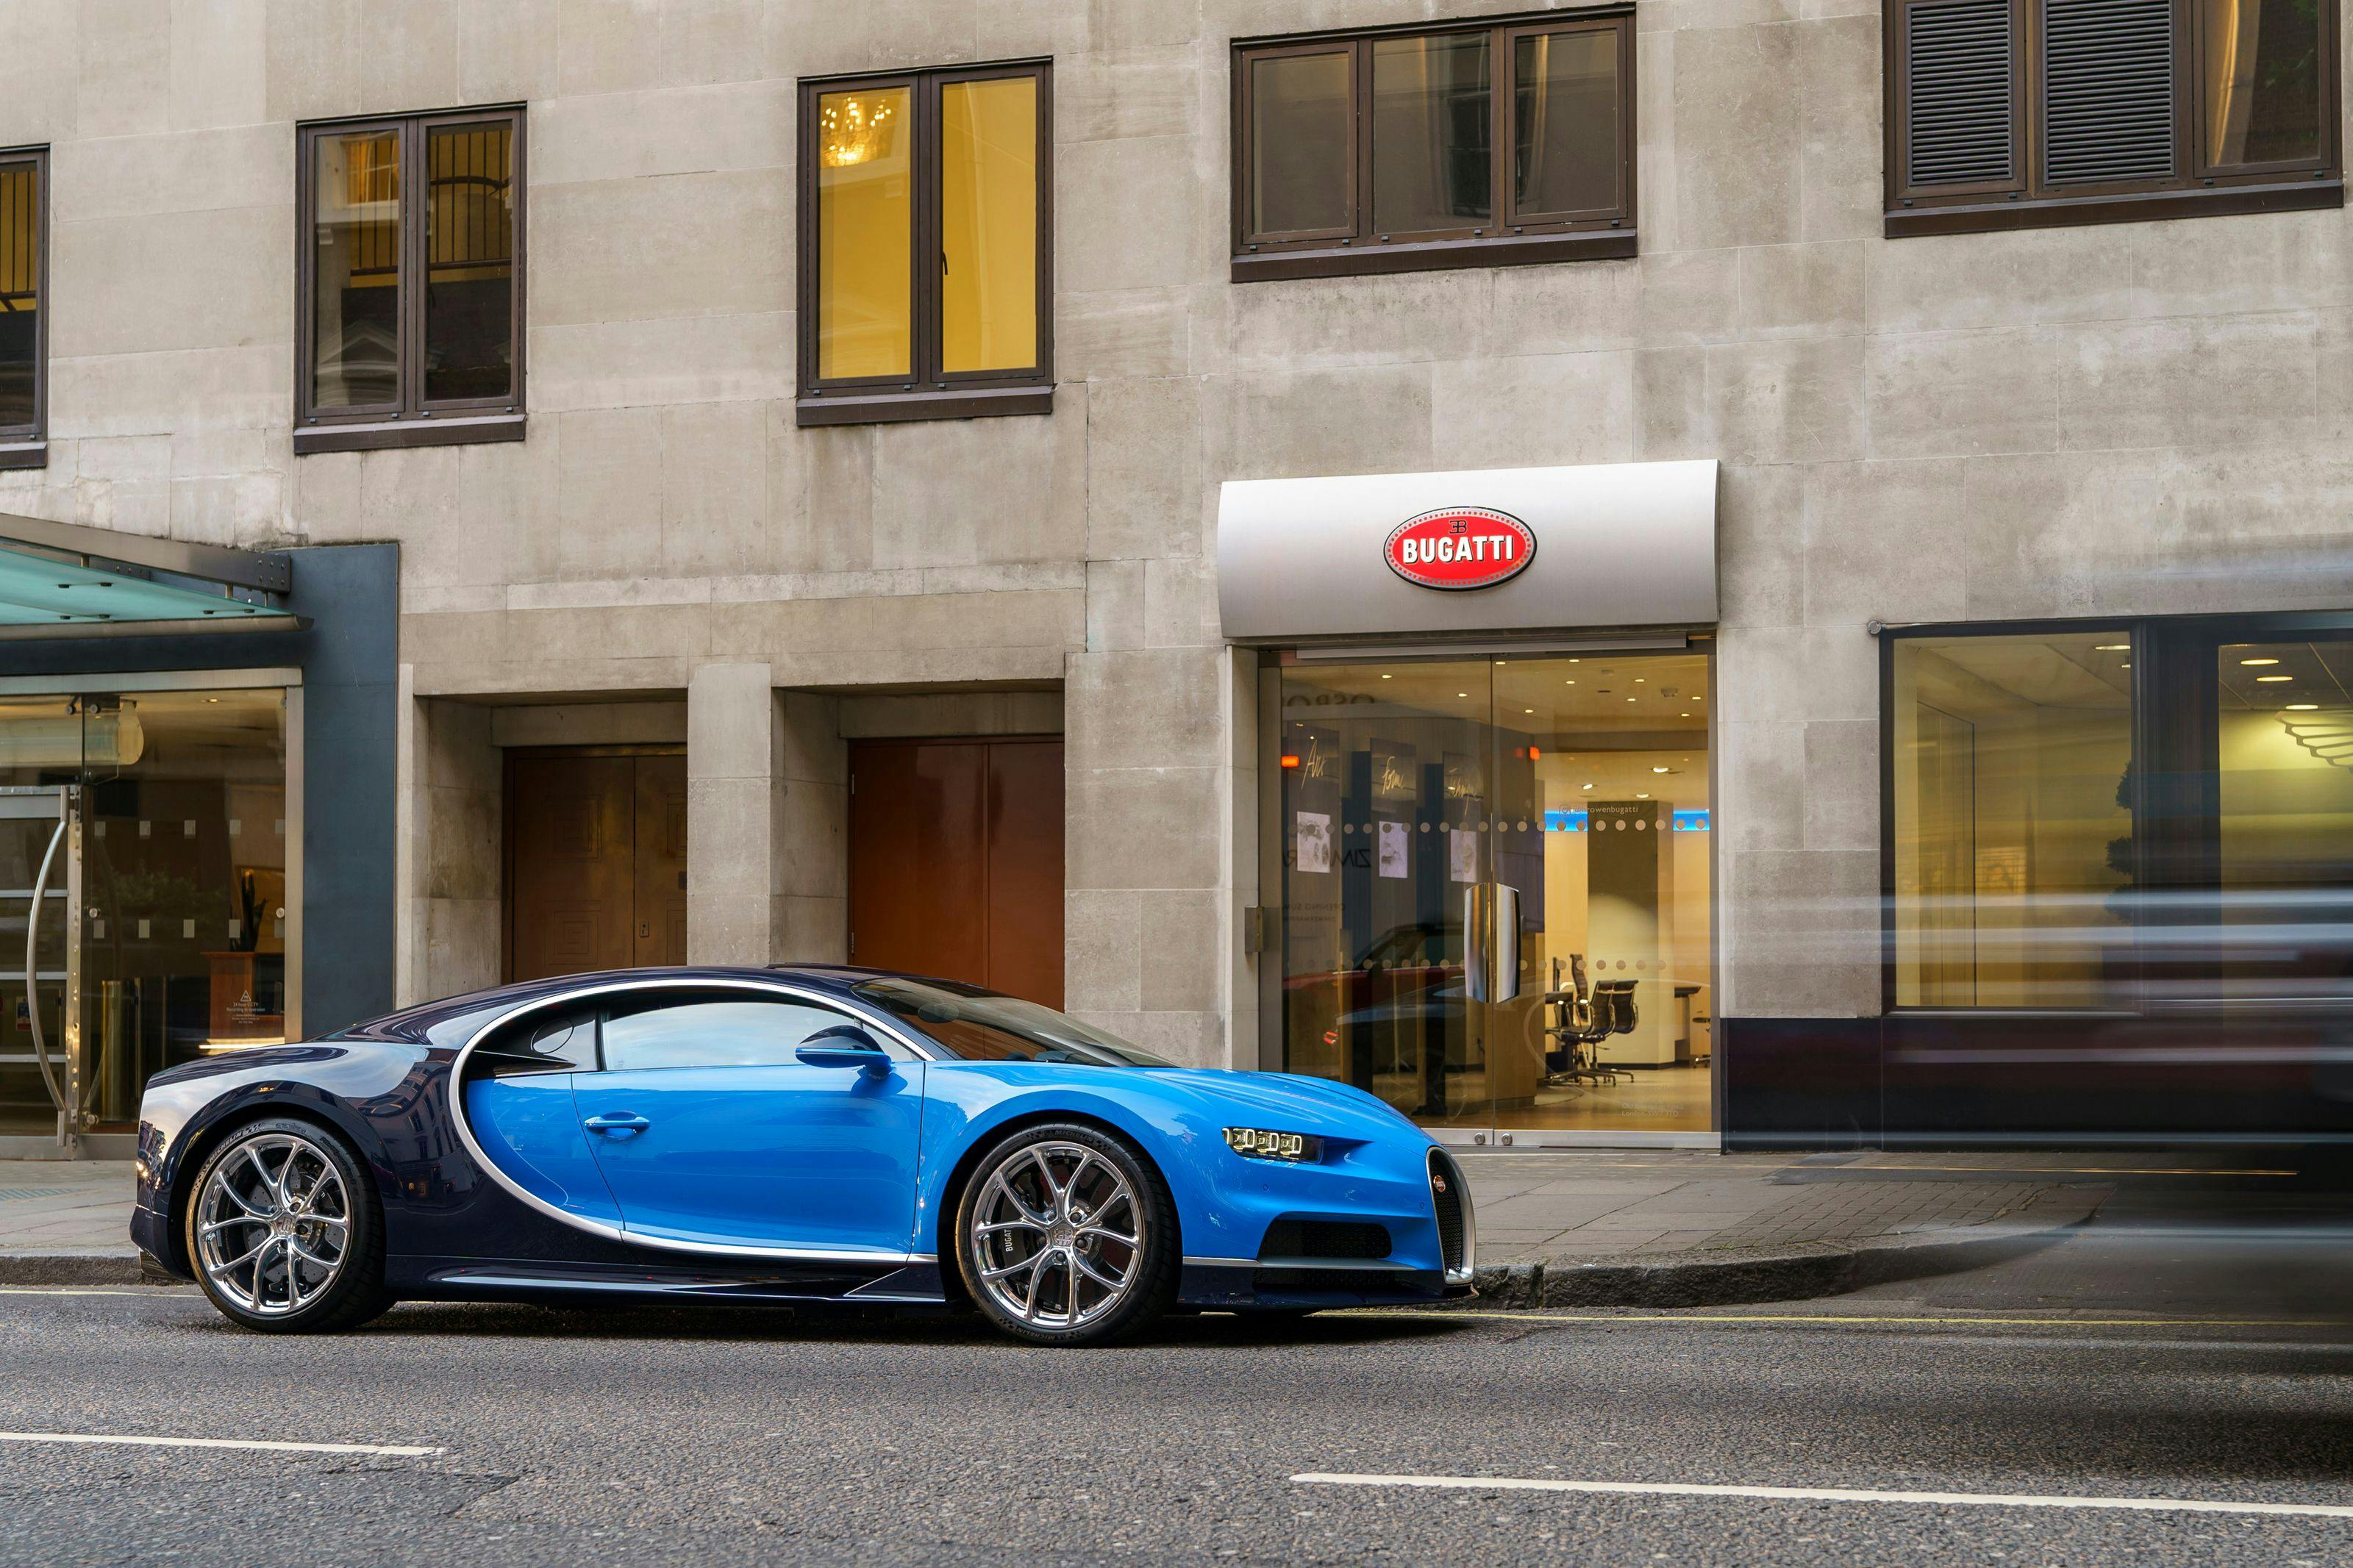 Bugatti London officially welcomes the first Chiron customer car